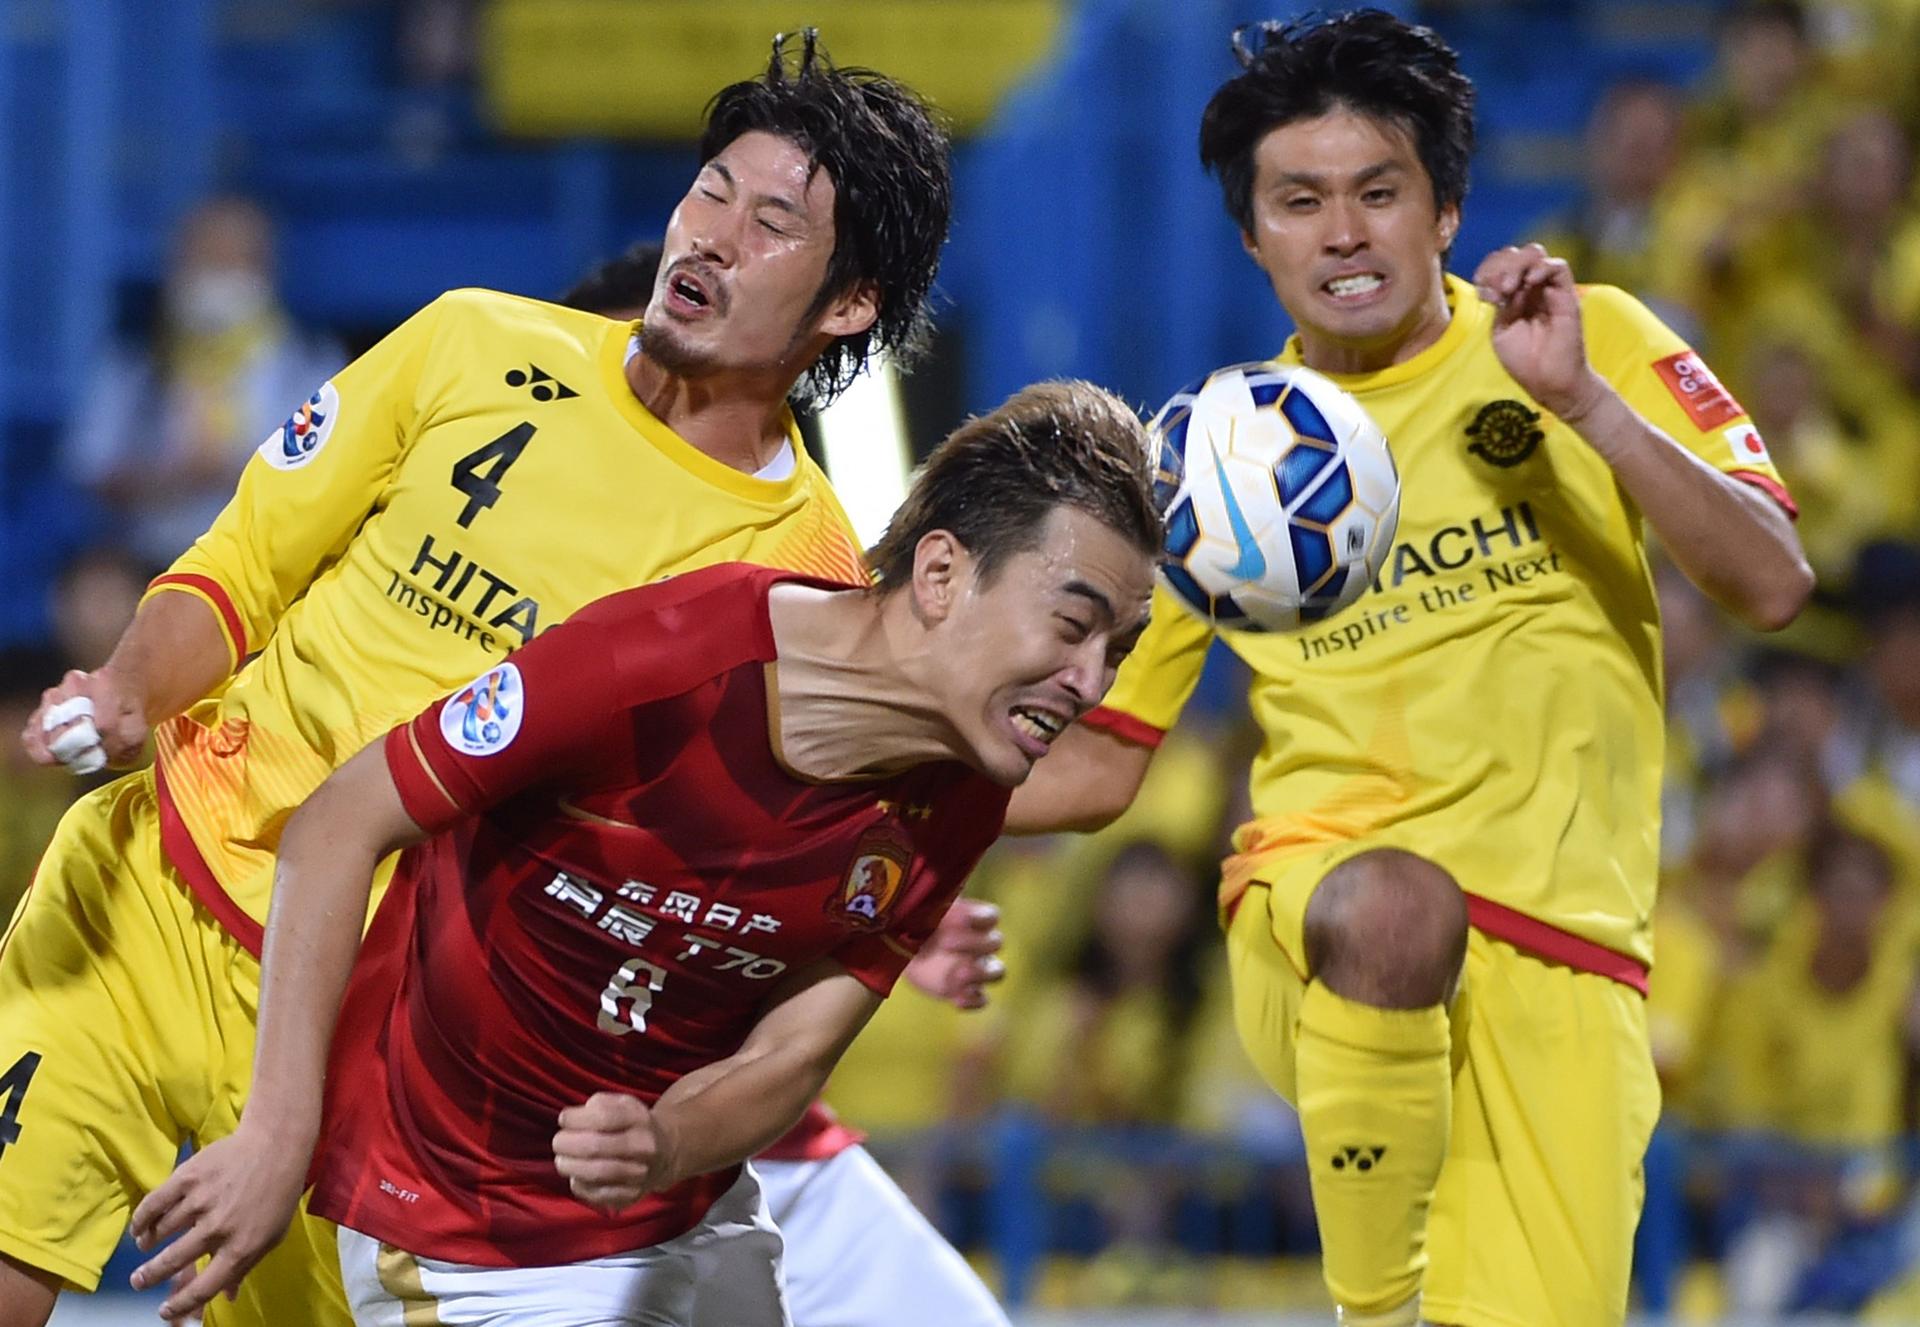 Guangzhou Evergrande defender Feng Xiaoting finds himself sandwiched by Kashiwa Reysol defender Daisuke Suzuki and forward Masato Kudo during their AFC Champions League quarter-final clash in Kashiwa. Photo: AFP 